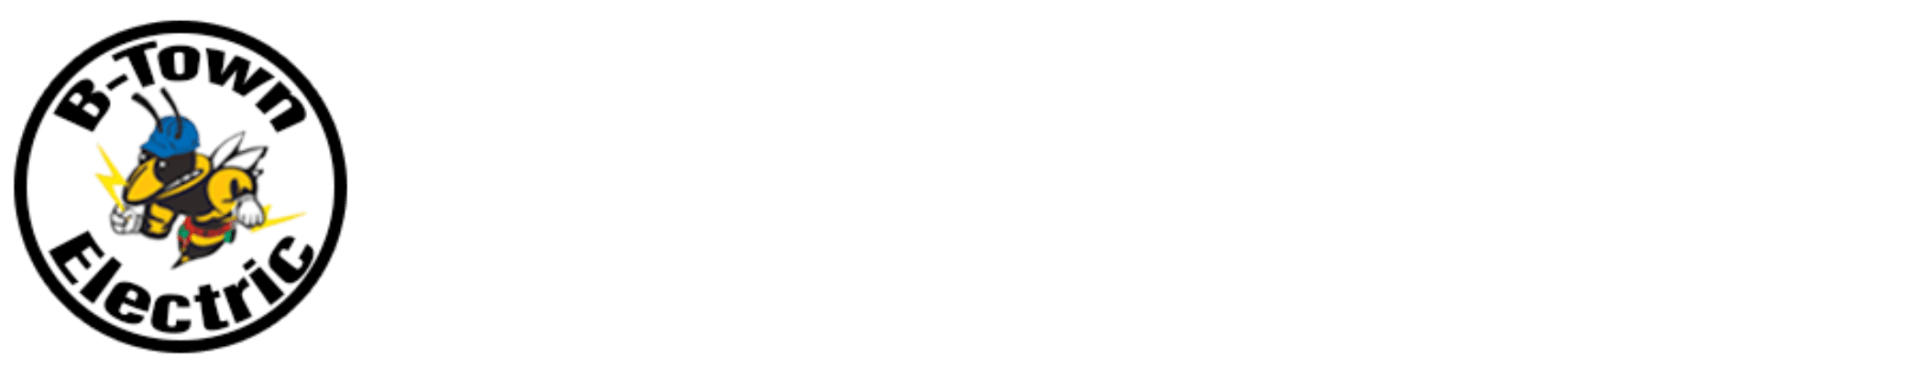 B-Town Electric Electrical contractor Serving Western Massachusetts